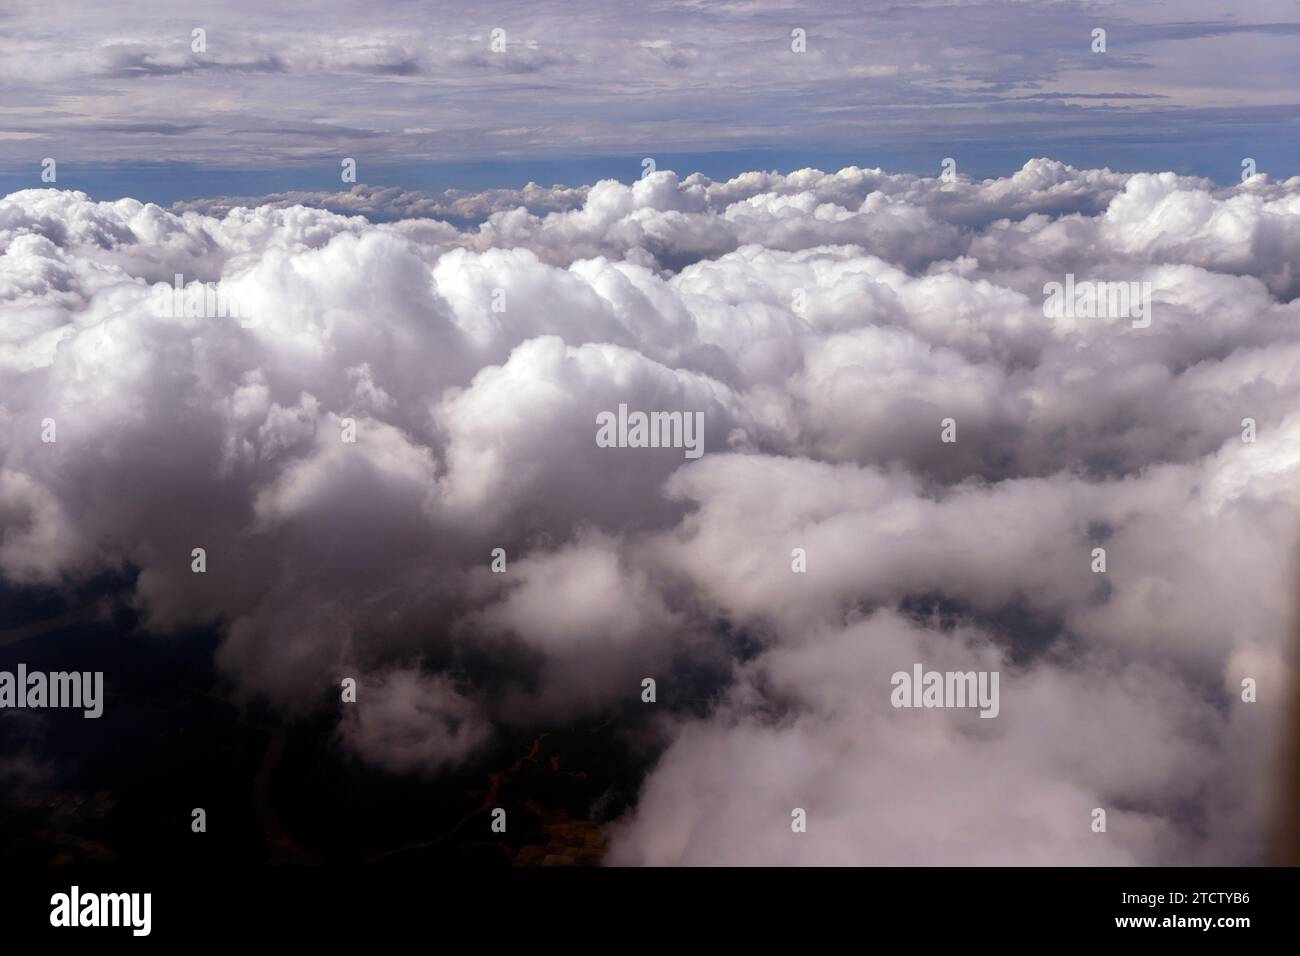 White clouds in the sky. Stock Photo